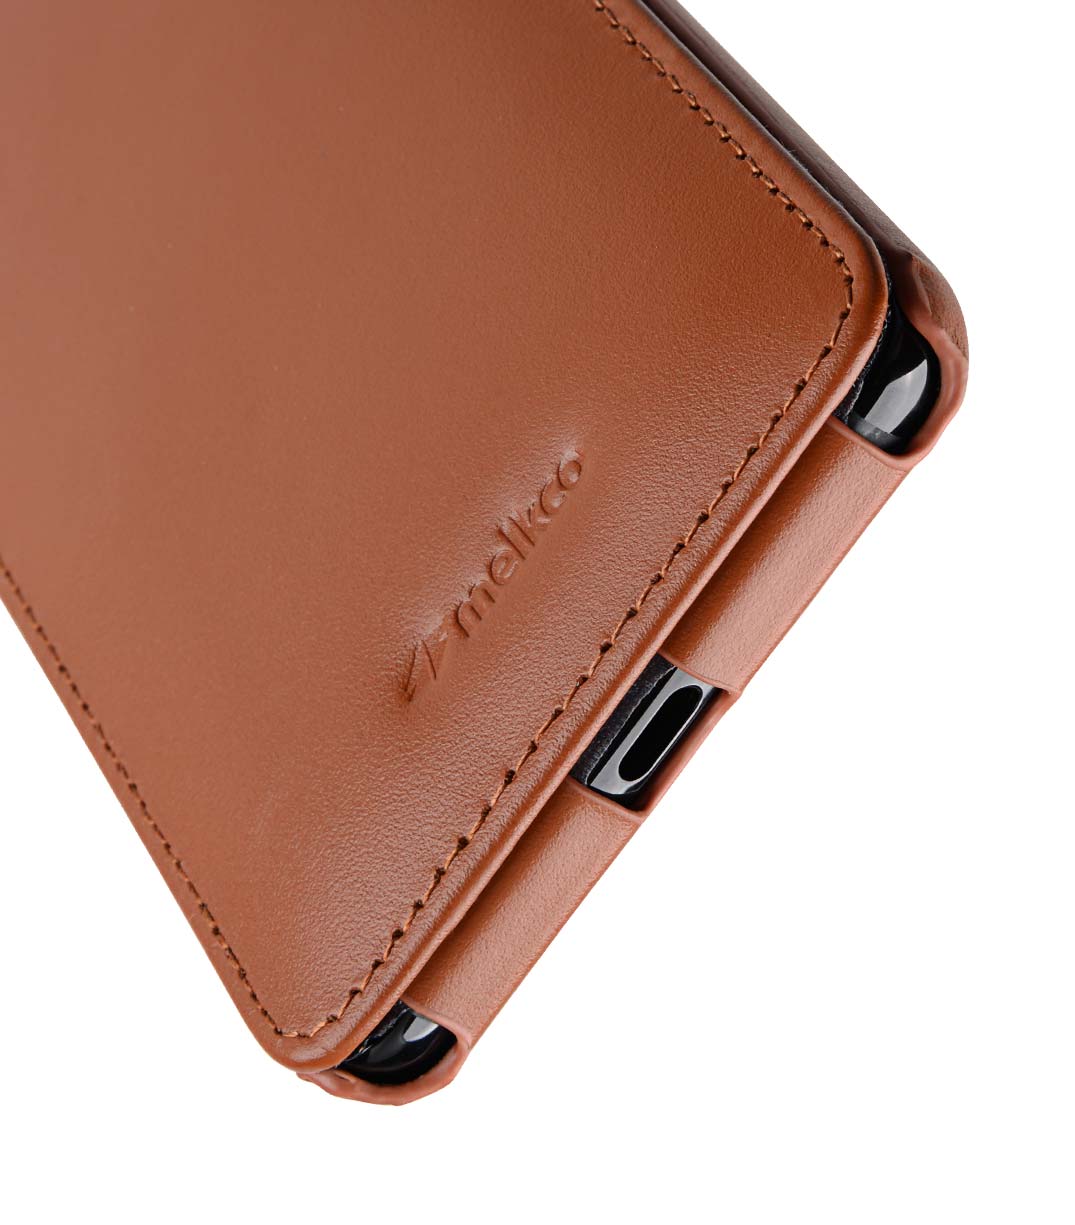 Melkco Premium Leather Case for Huawei Mate 10 - Jacka Type (Brown CH)